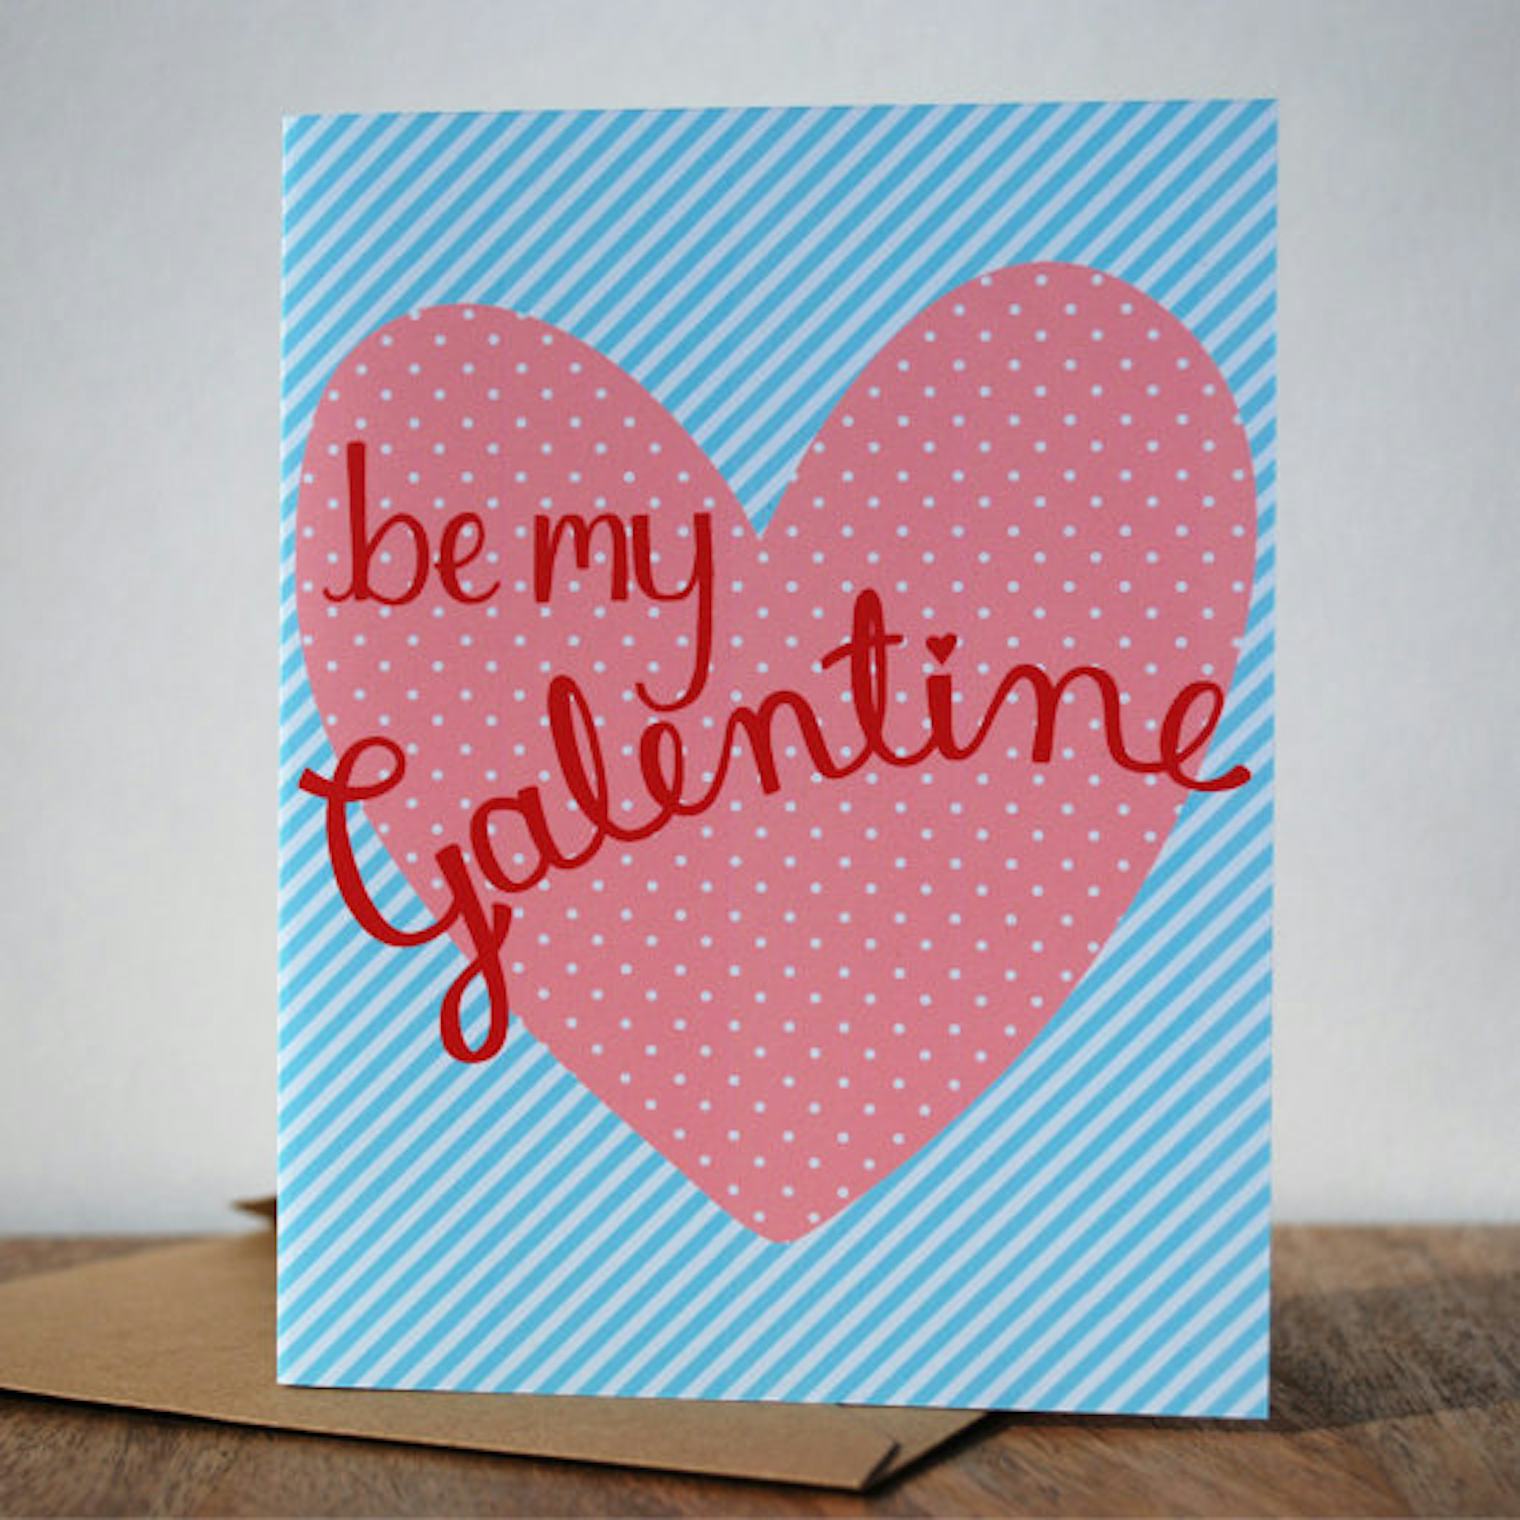 20 Galentine's Day Cards To Send Your Favorite Ladies